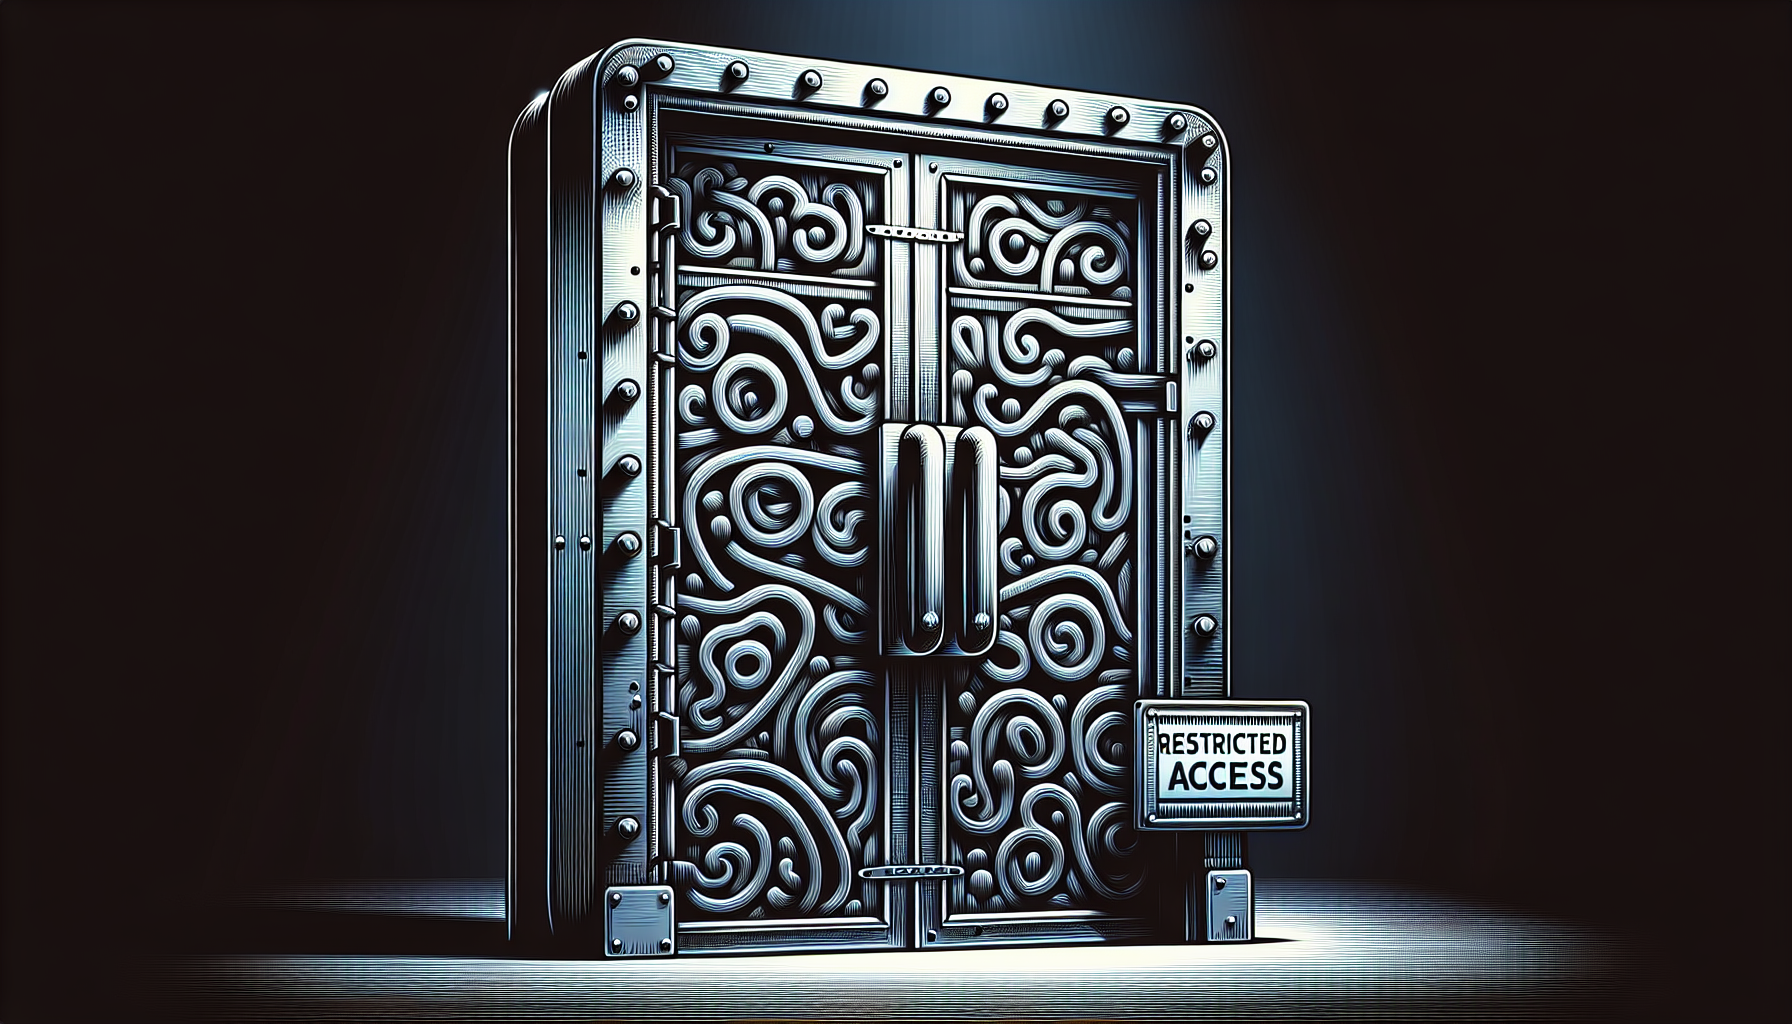 Illustration of a restricted access sign on a door to symbolize limited access to confidential employee information